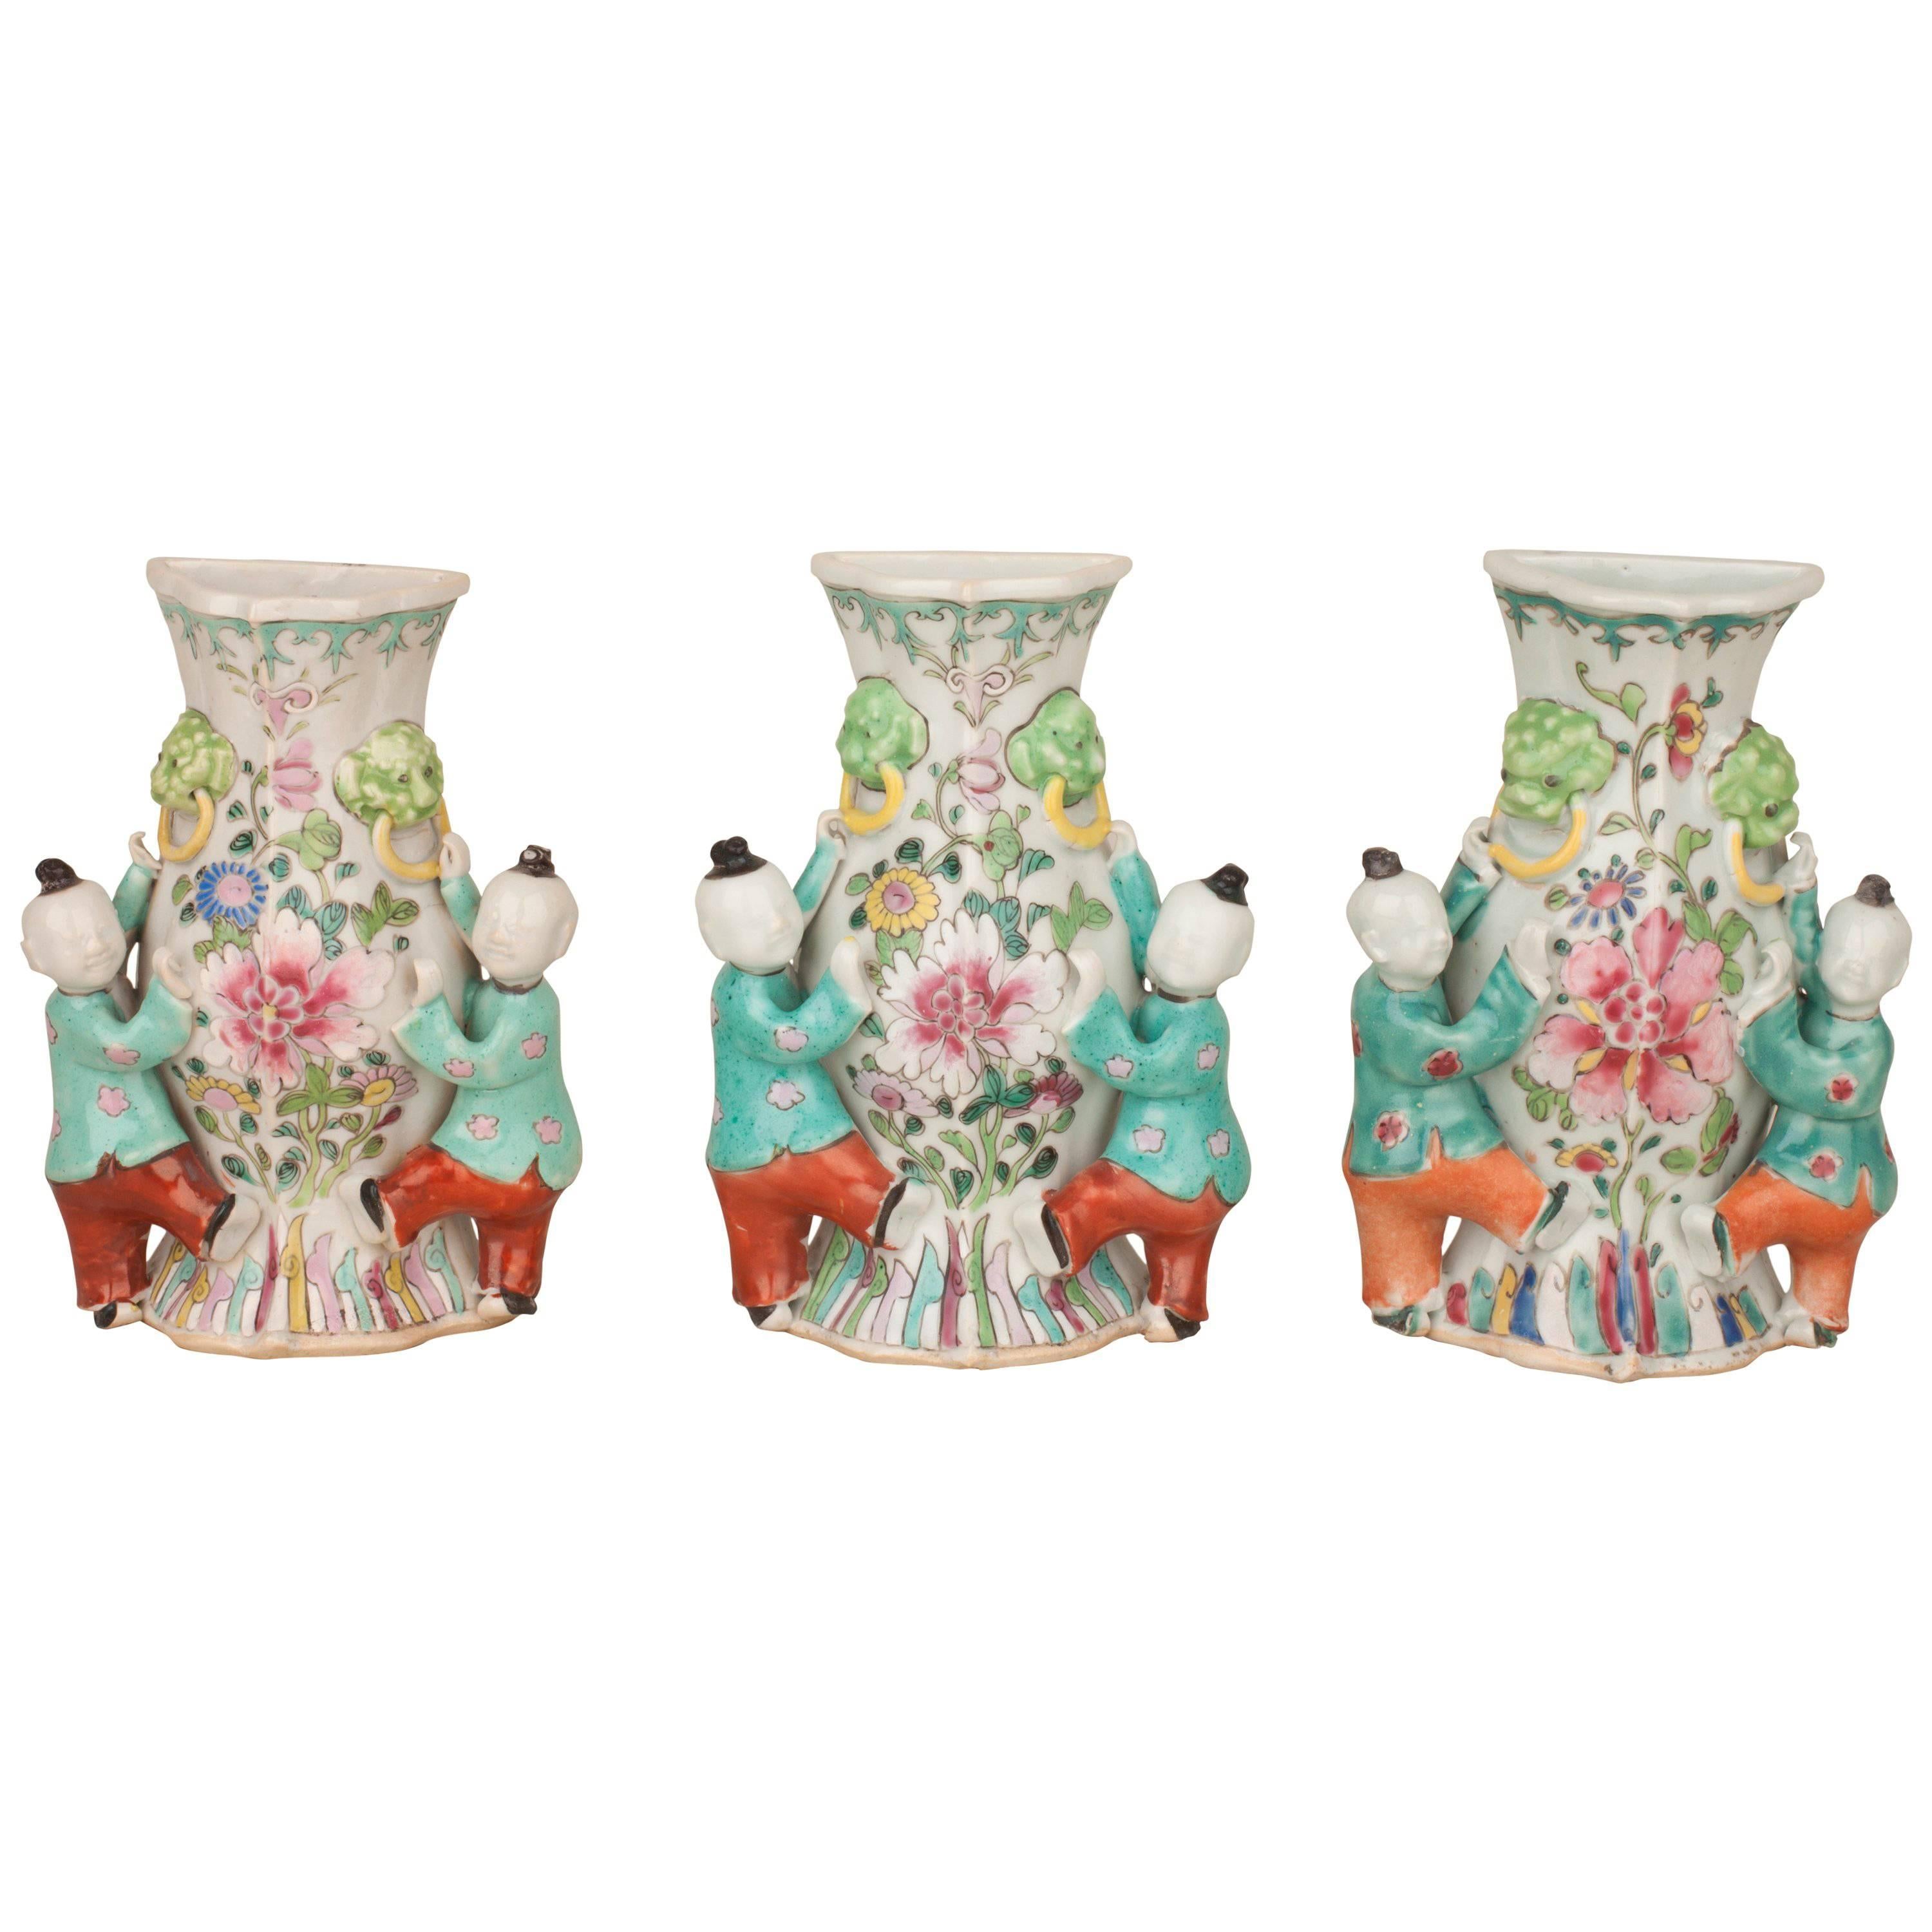 Set of Three Chinese Porcelain Famille Rose Wall Vases, Boys, 18th Century For Sale